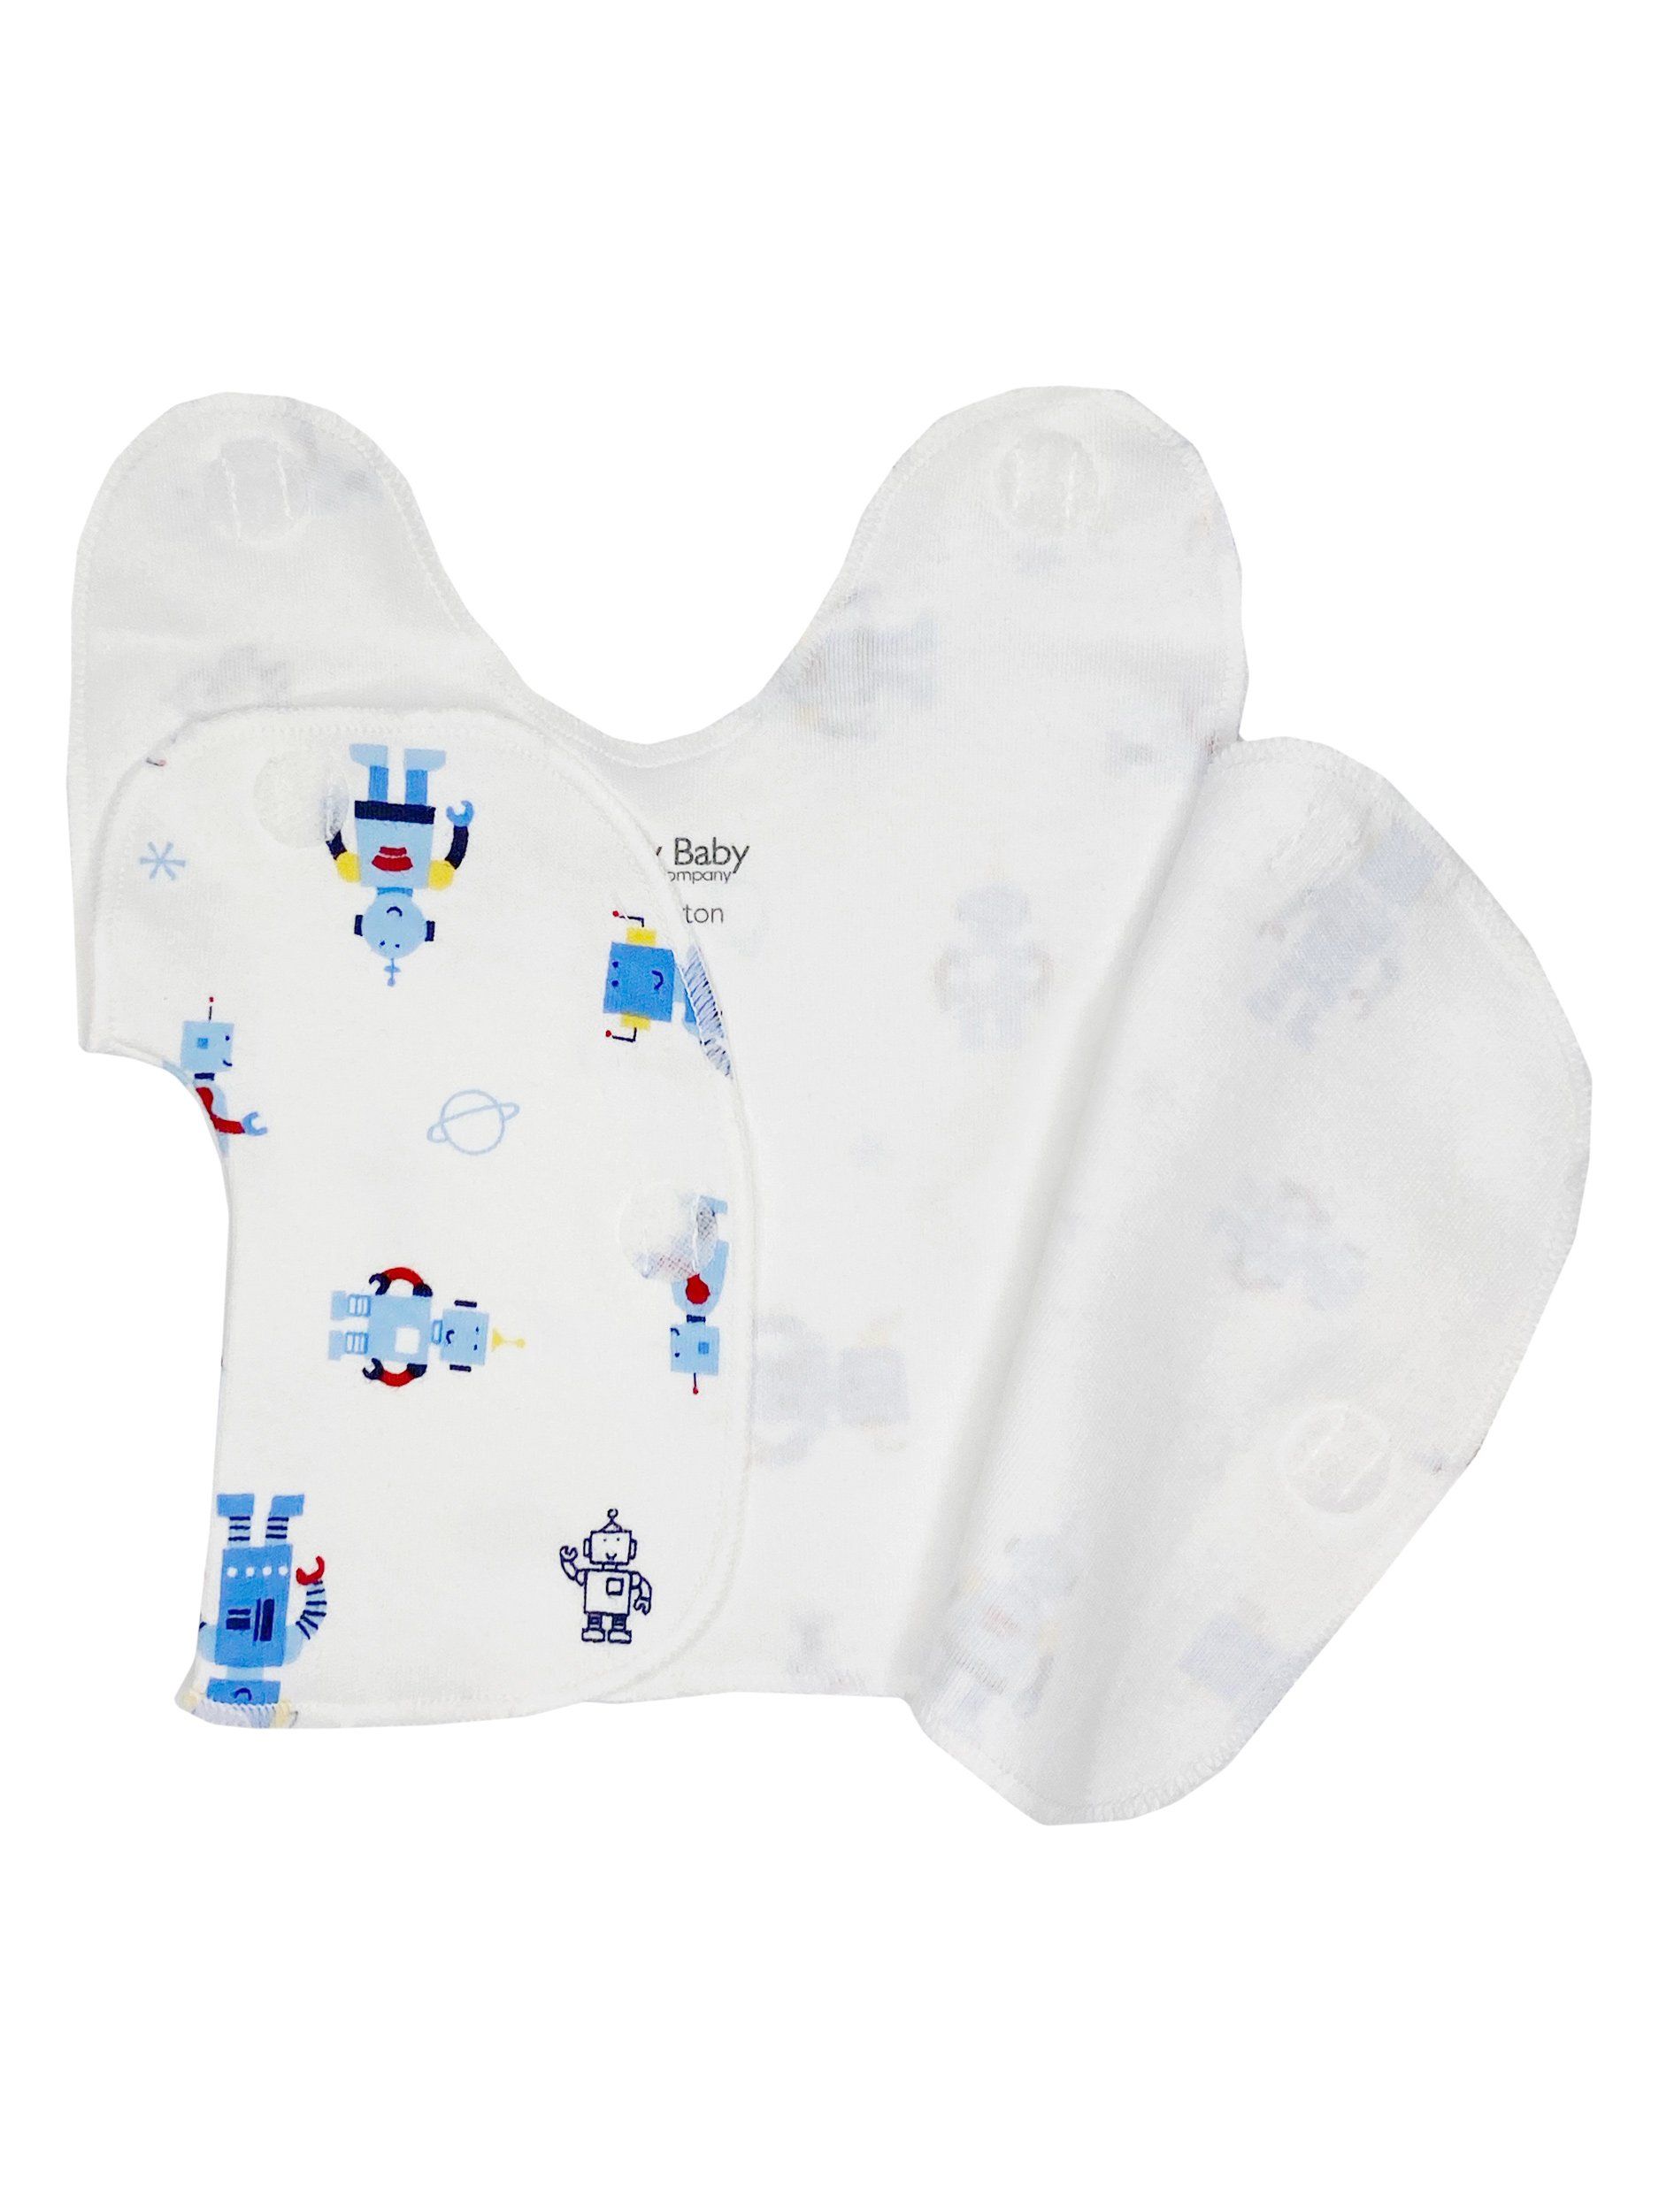 Premature Baby Top, Robots - Incubator Vest - Itty Bitty Baby Clothing